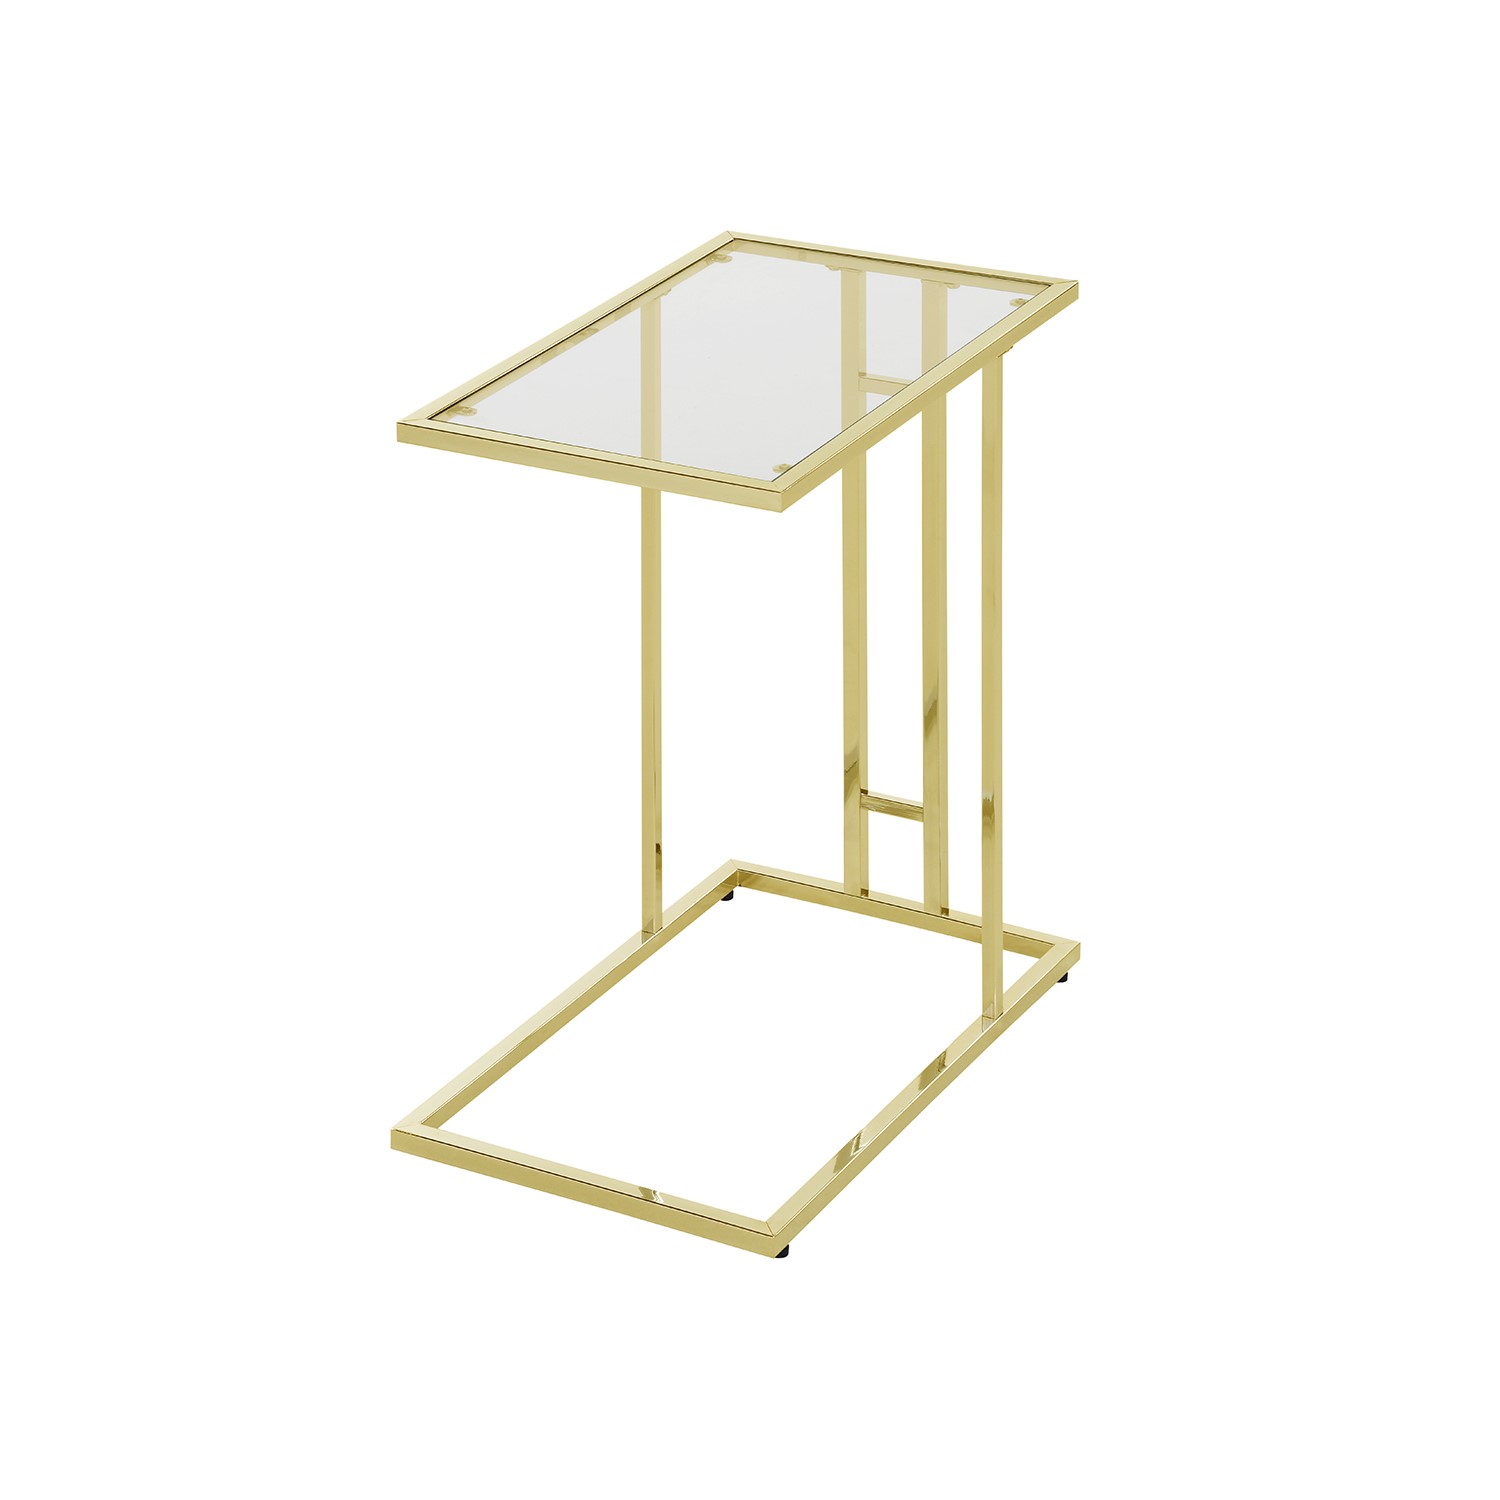 Read more about Harry gold sofa table clear glass dsp kd